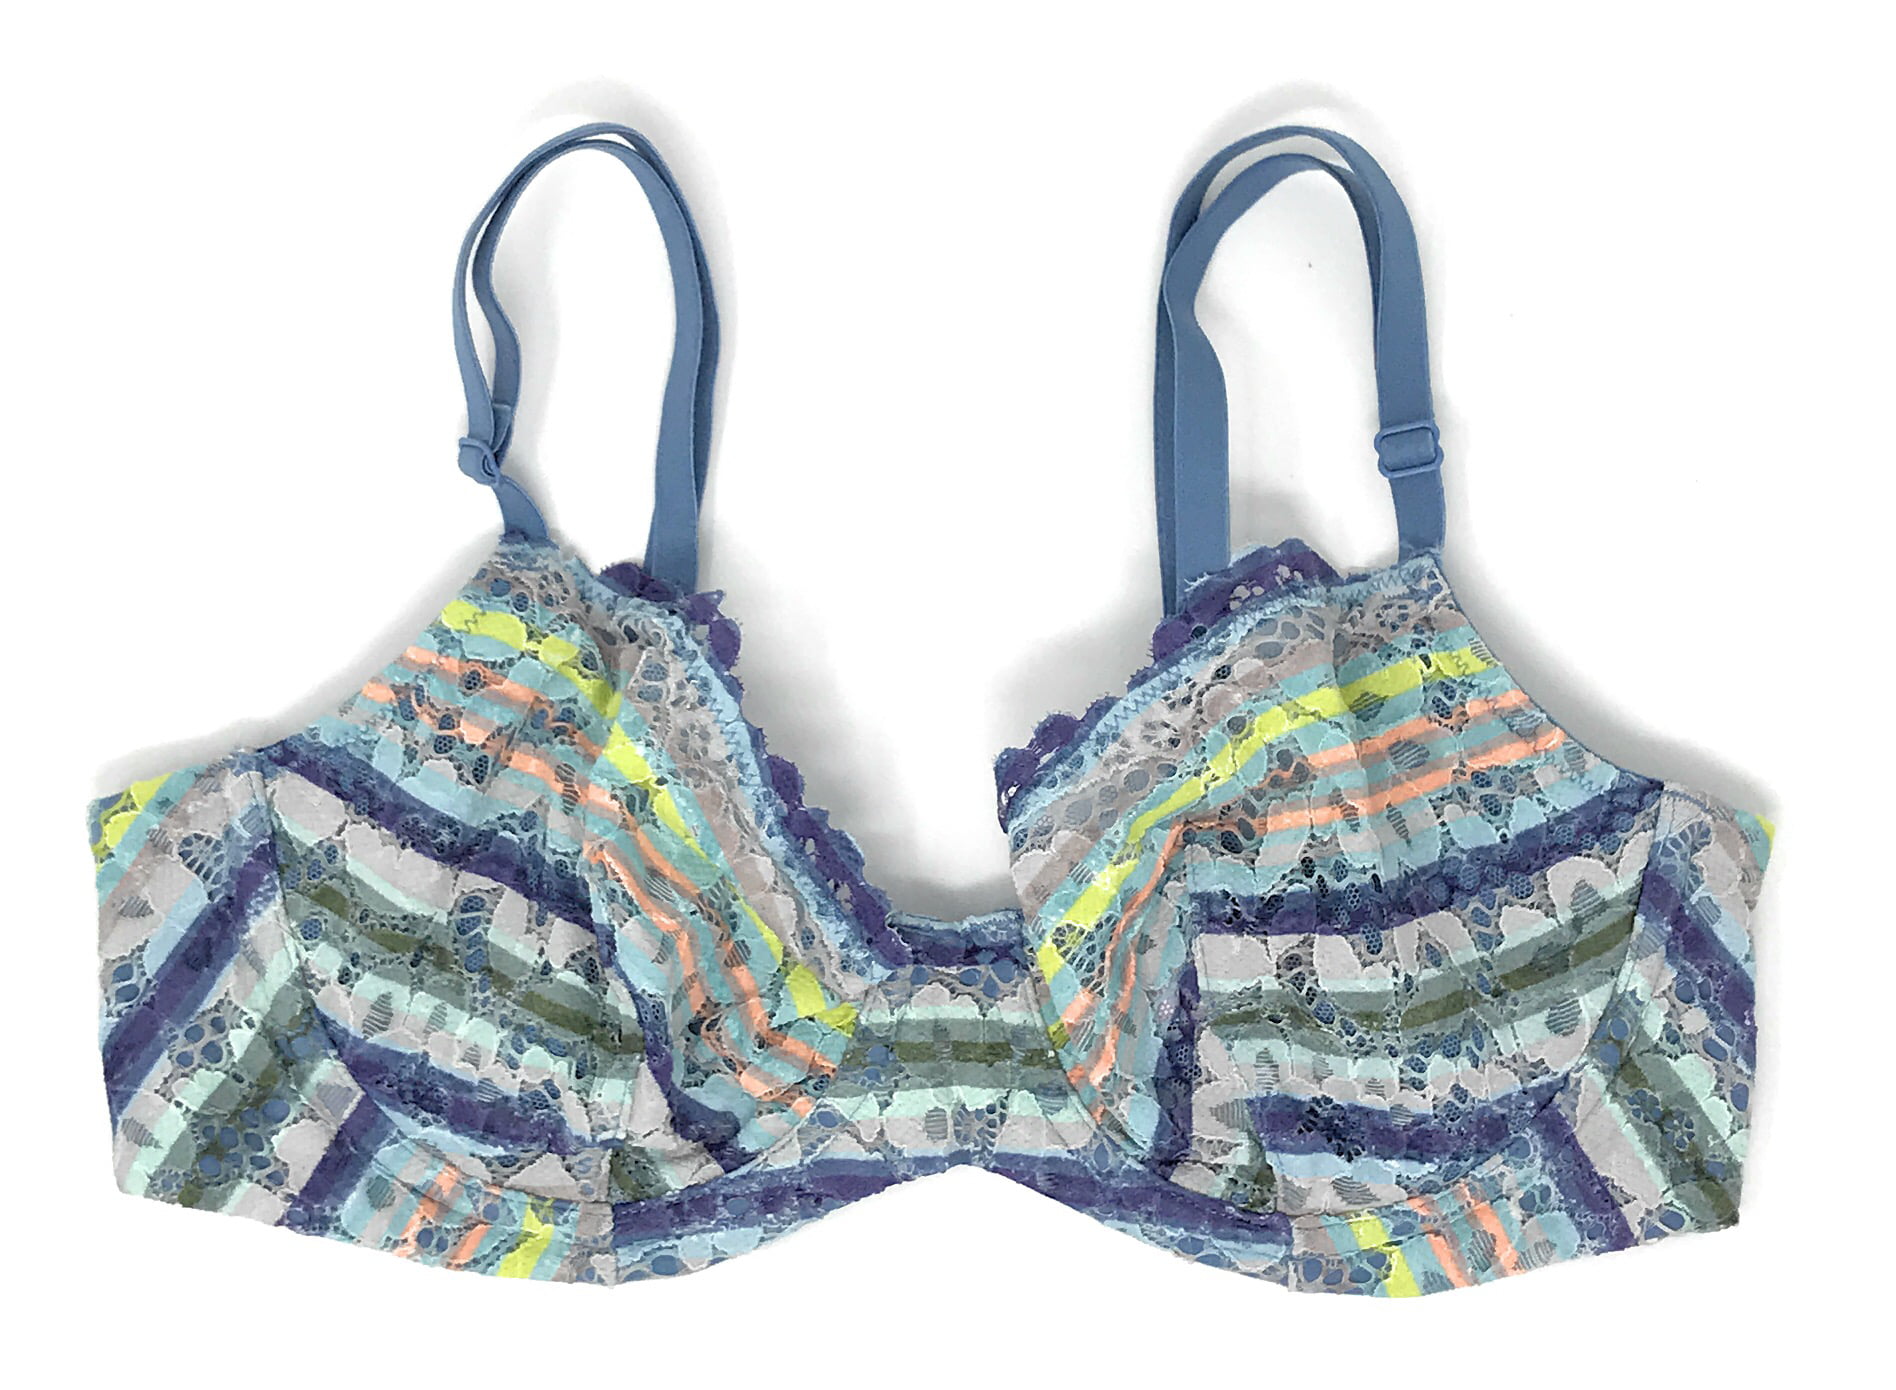 Victoria's Secret Floral Unlined Bra 38d Blue Size 38 D - $71 New With Tags  - From Amanda